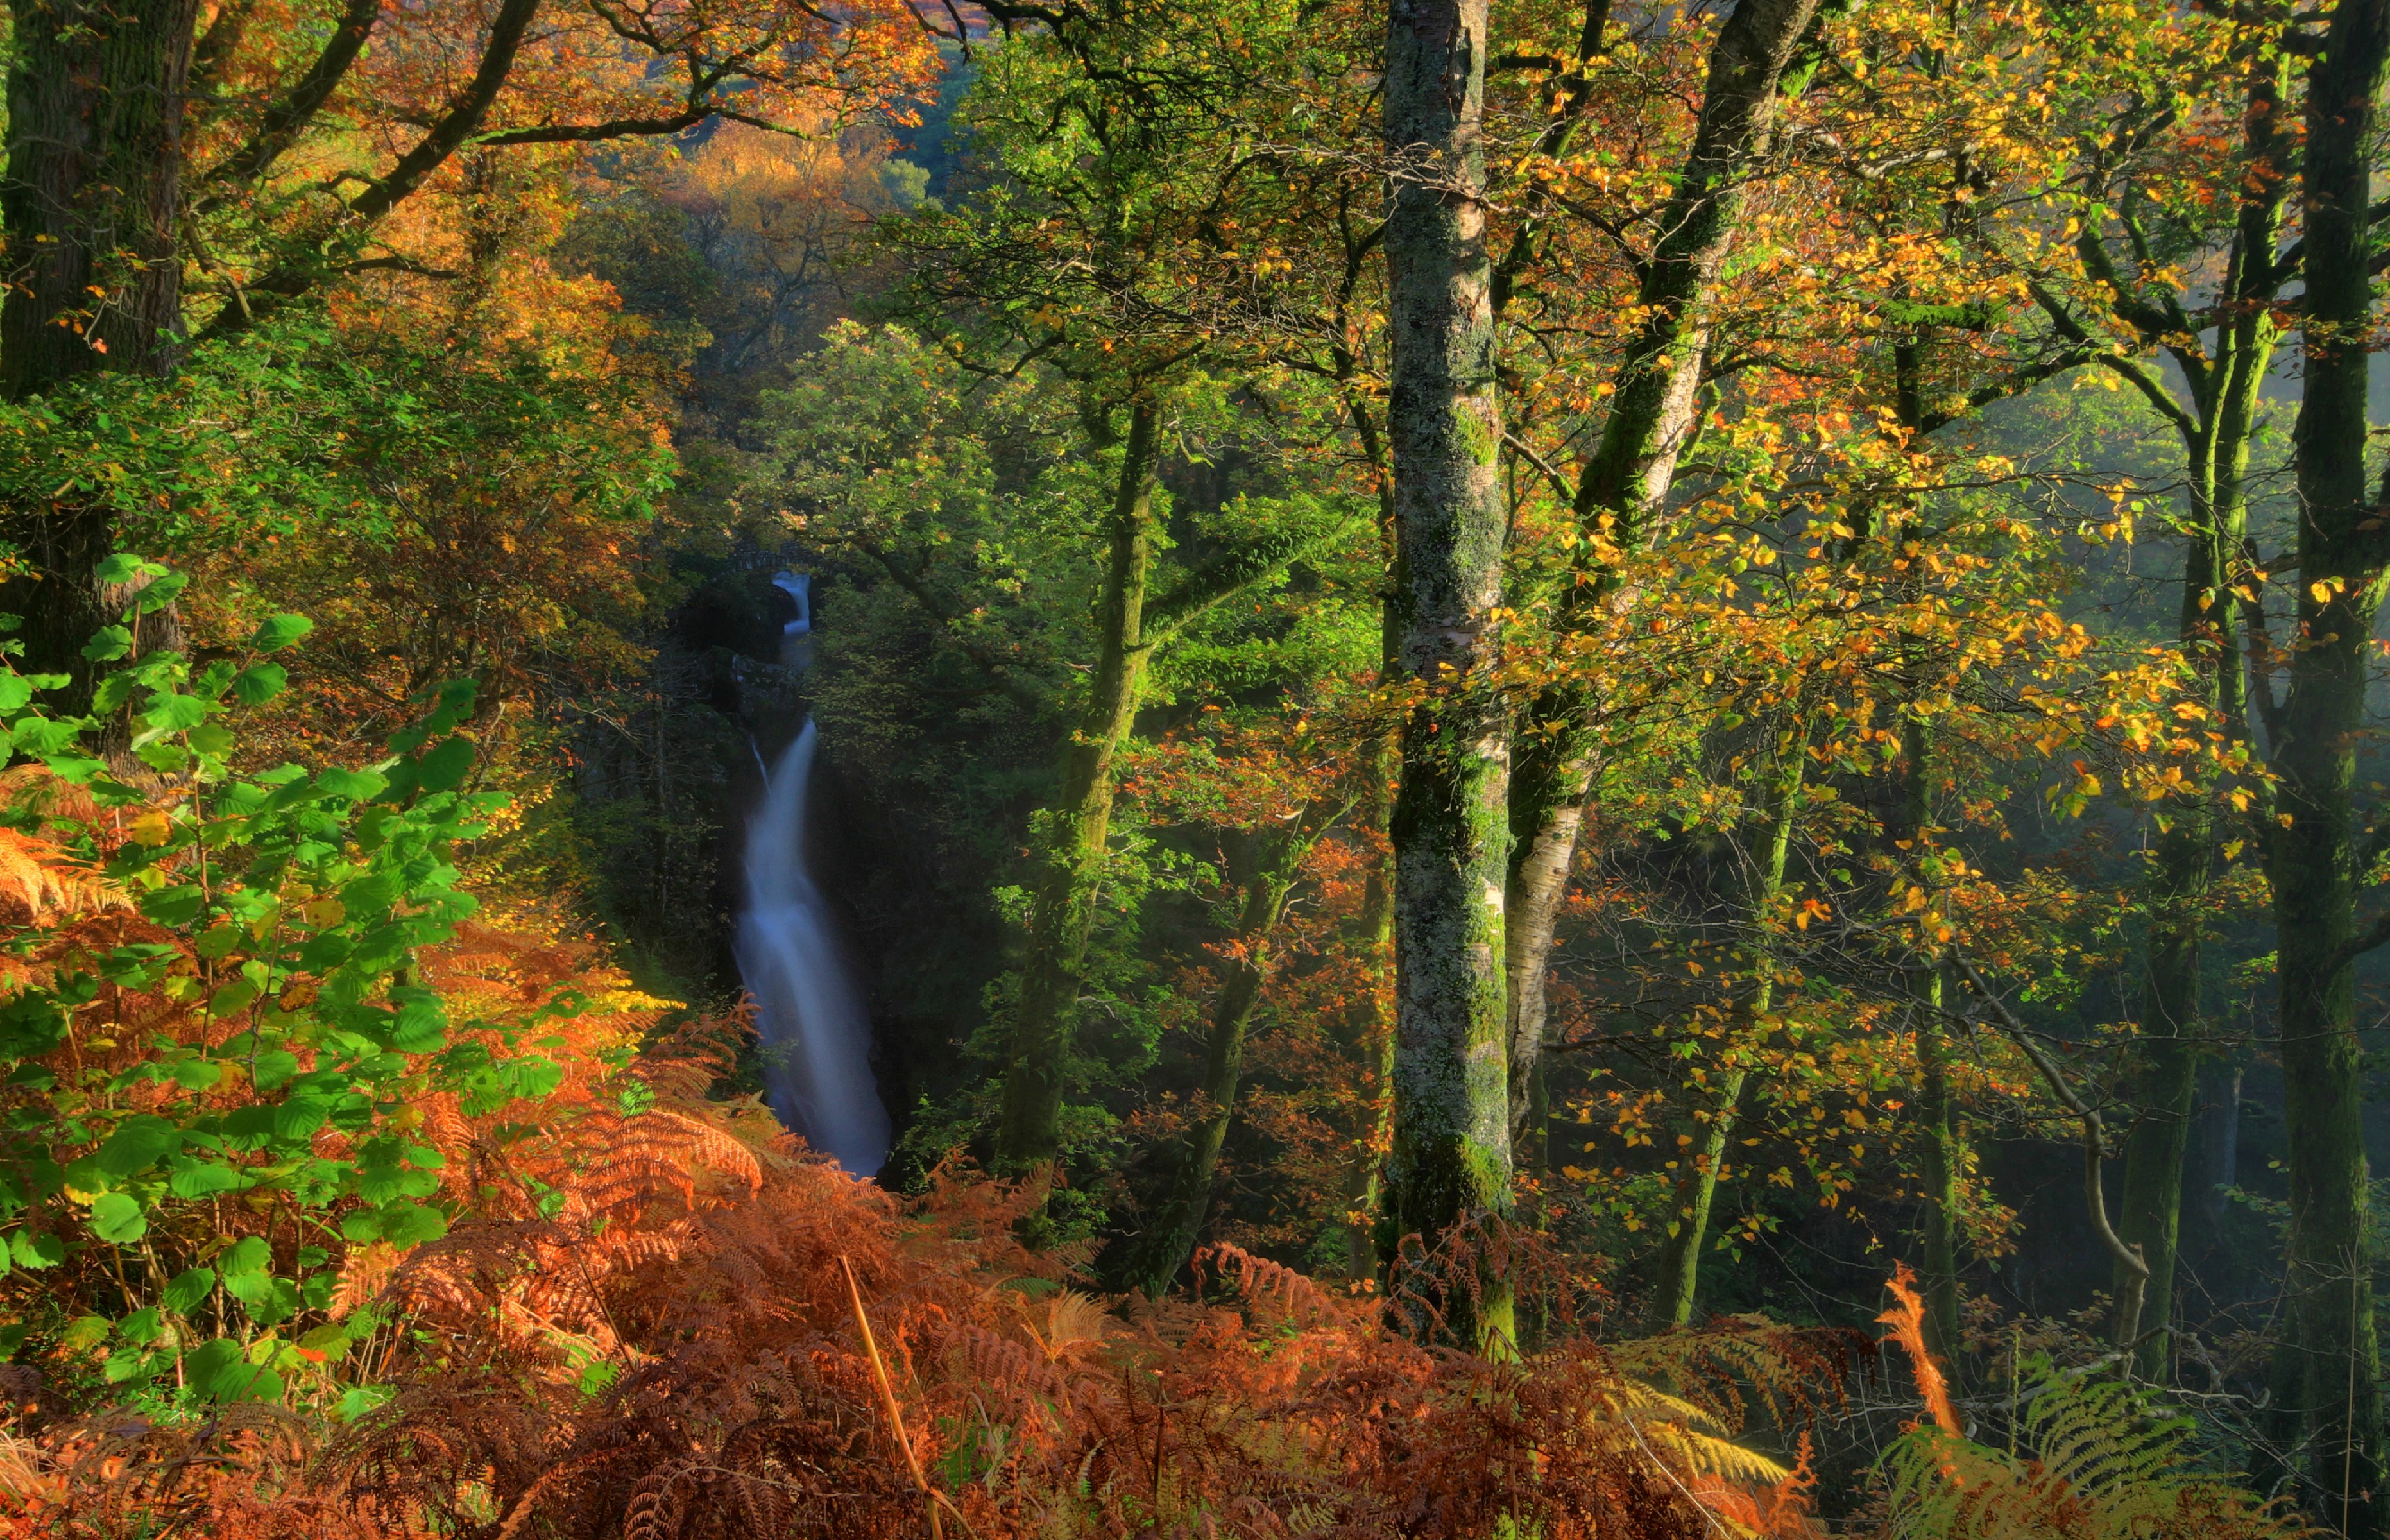 england, Parks, Forests, Waterfalls, Autumn, Trunk, Tree, Dockray, Nature Wallpaper